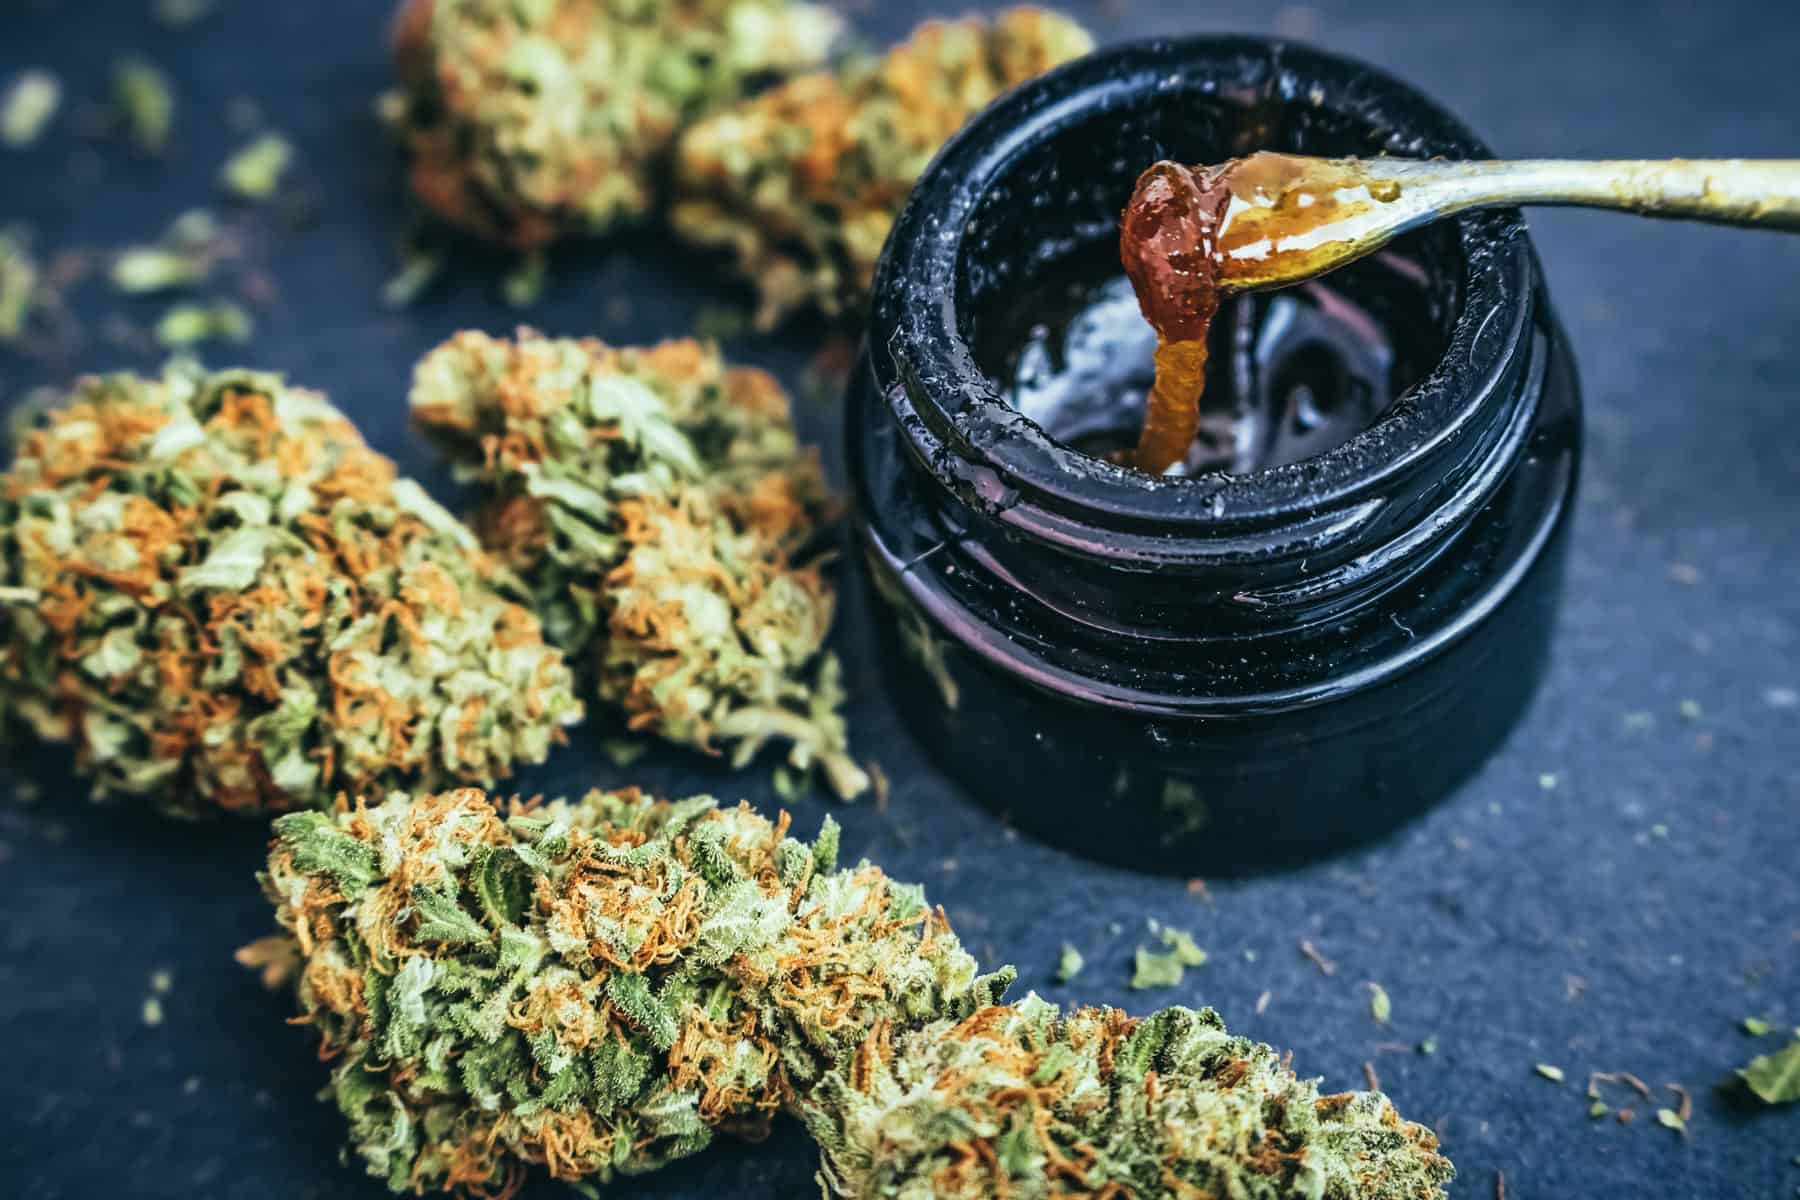 Get Lifted with Delta 8 Live Resin: The Ultimate Guide